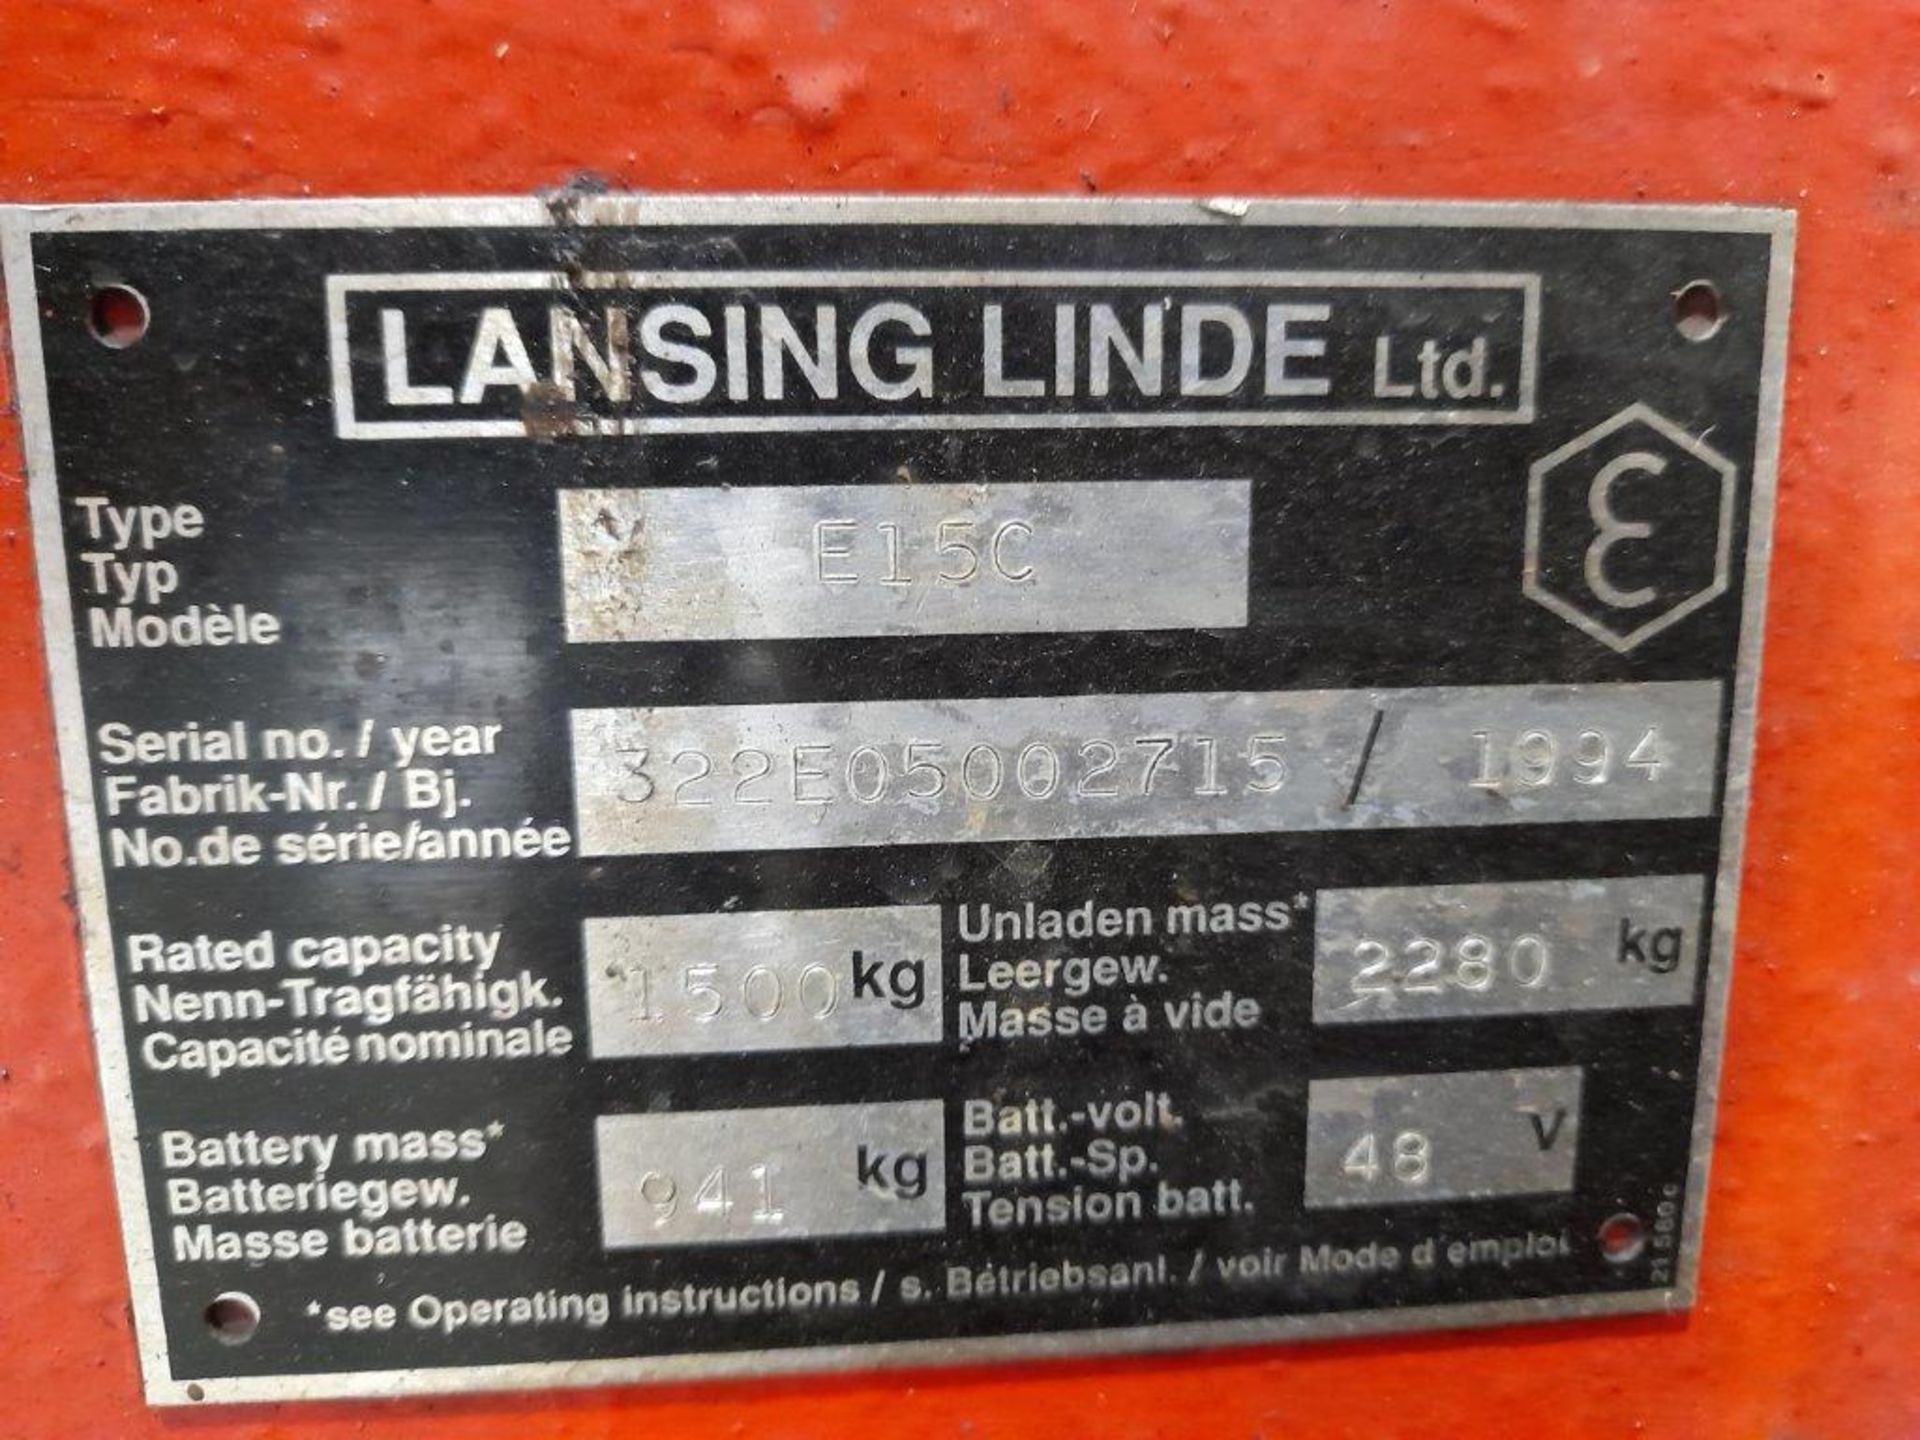 Lansing Linde electric powered forklift truck, serial no. 322E 05002715 (1994), rated capacity 1, - Image 6 of 8